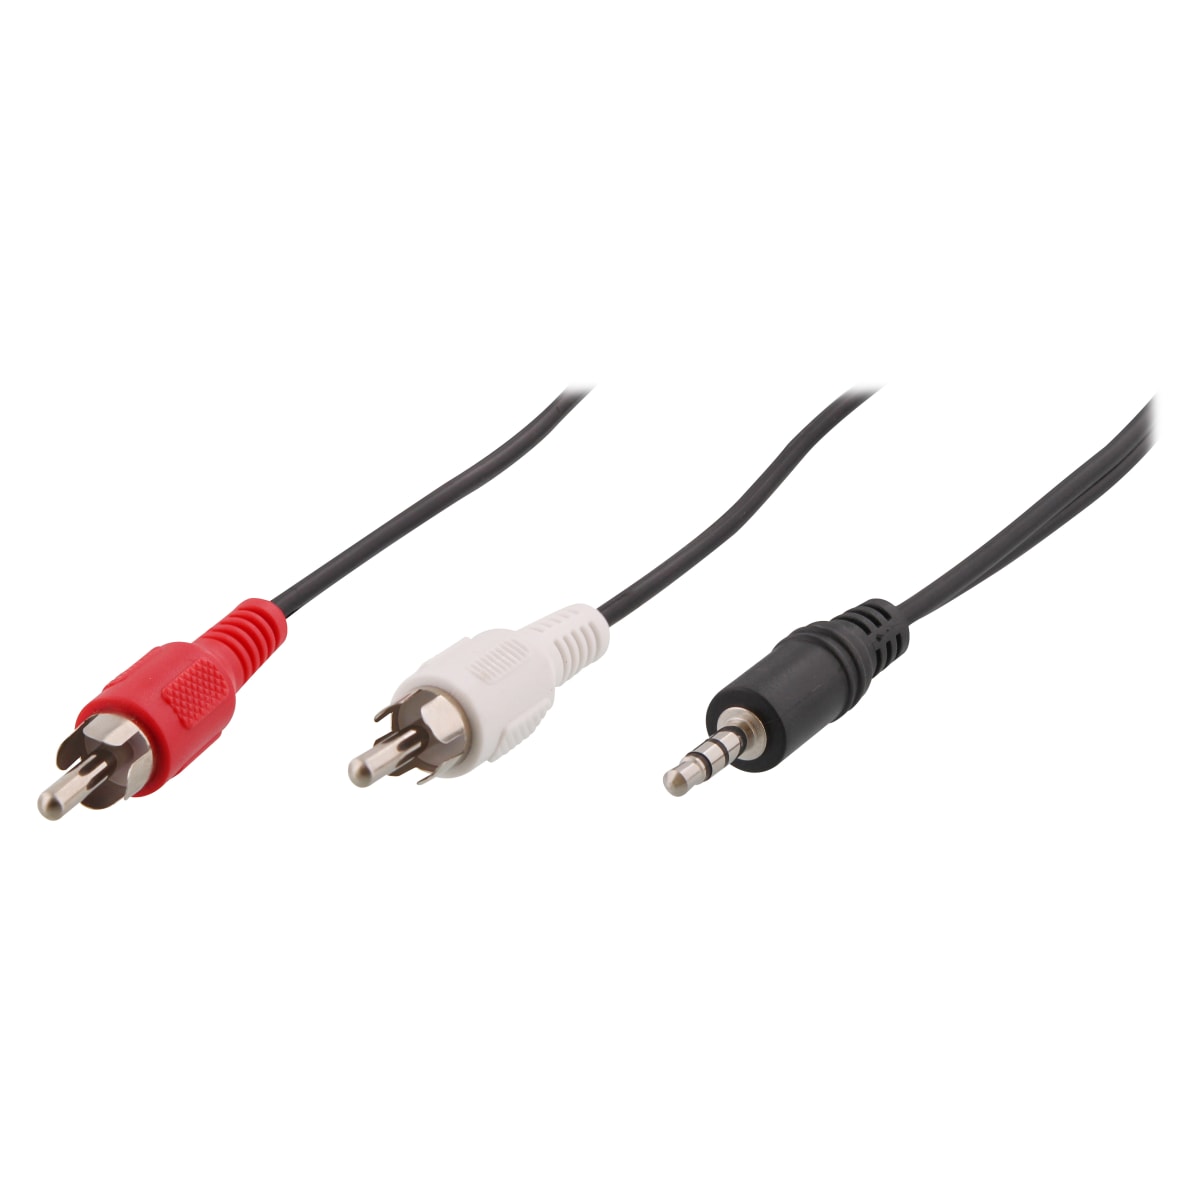 Jack 3,5mm male / 2 RCA male cable 1.2m